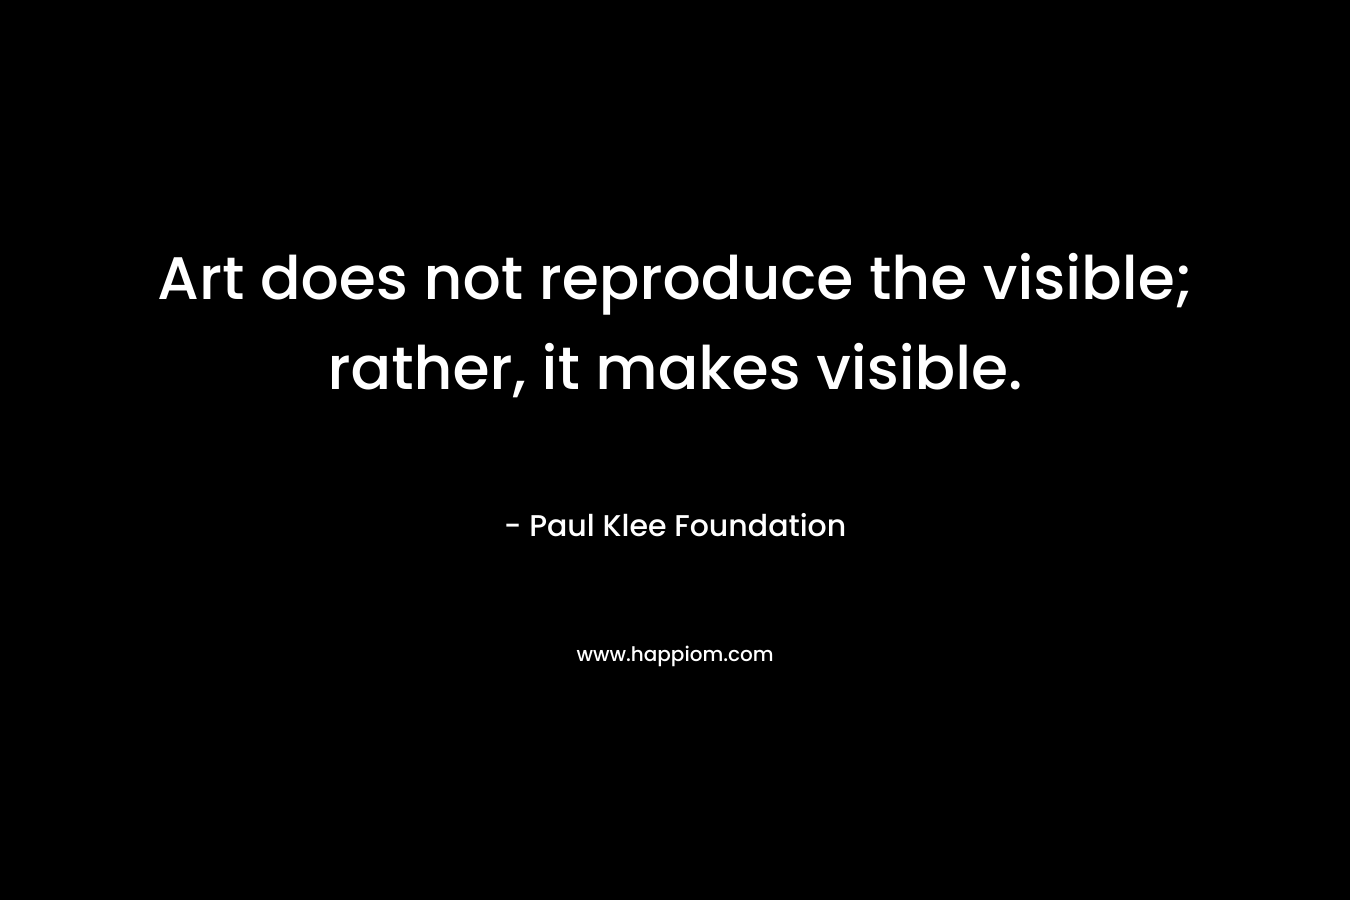 Art does not reproduce the visible; rather, it makes visible. – Paul Klee Foundation